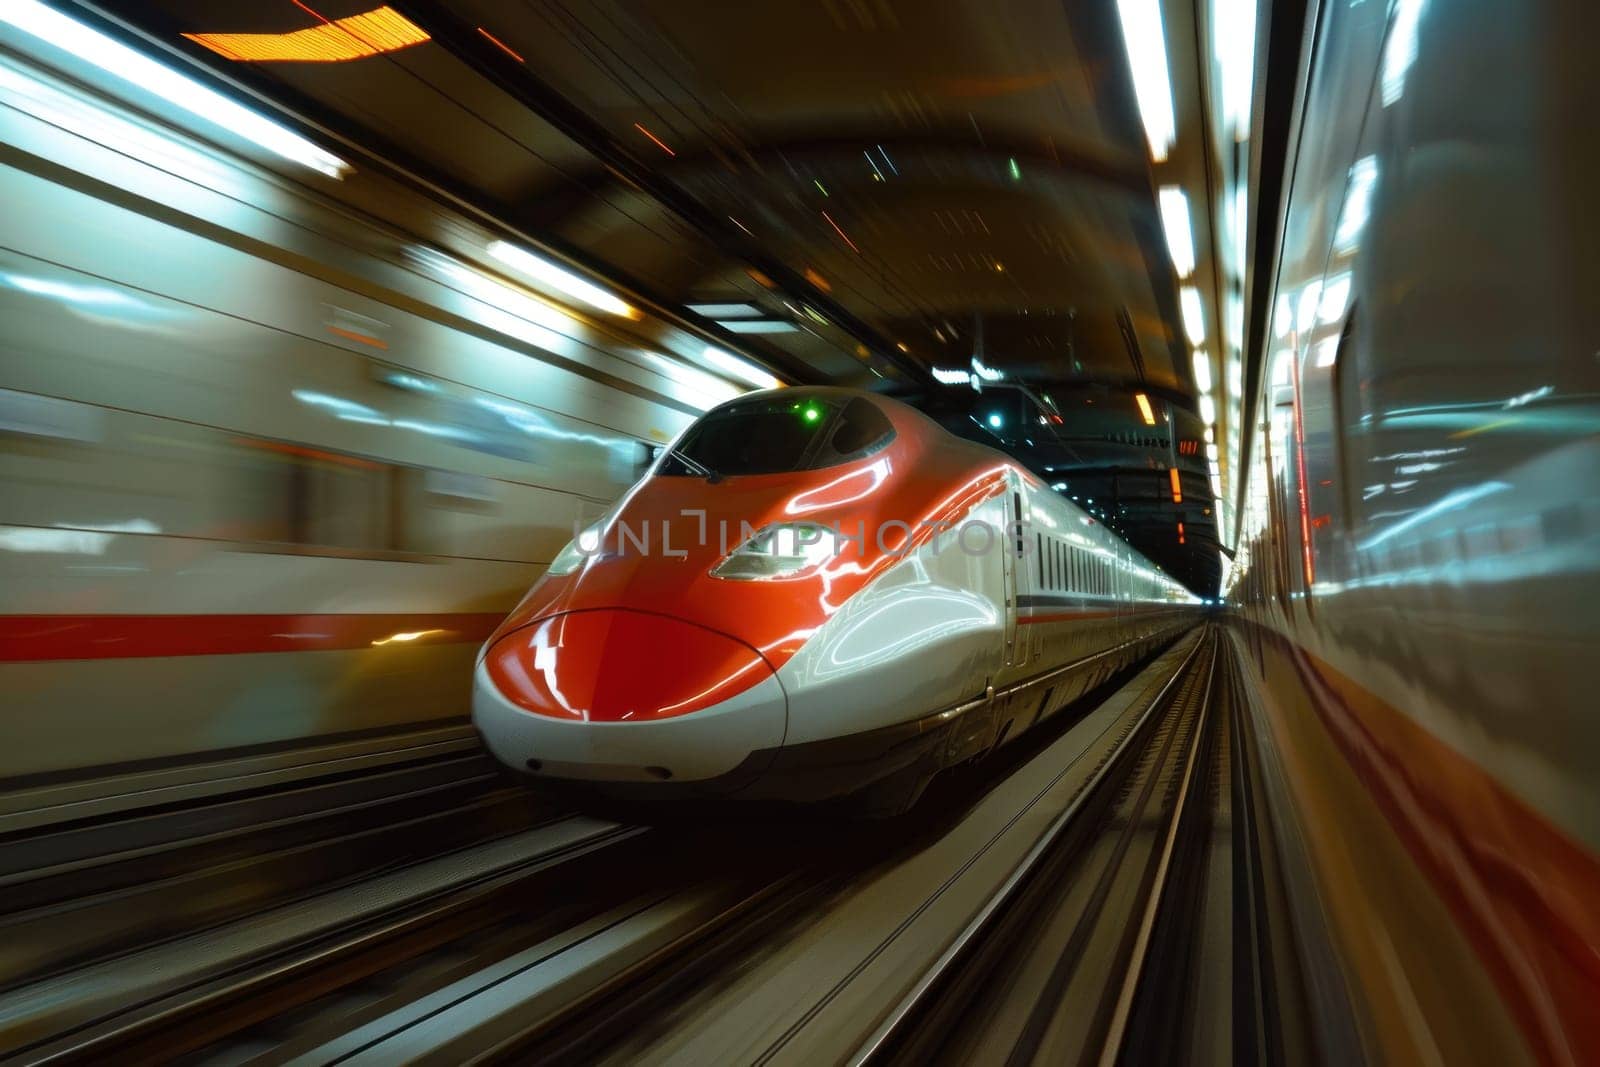 A train is traveling through a tunnel. The train is red and white